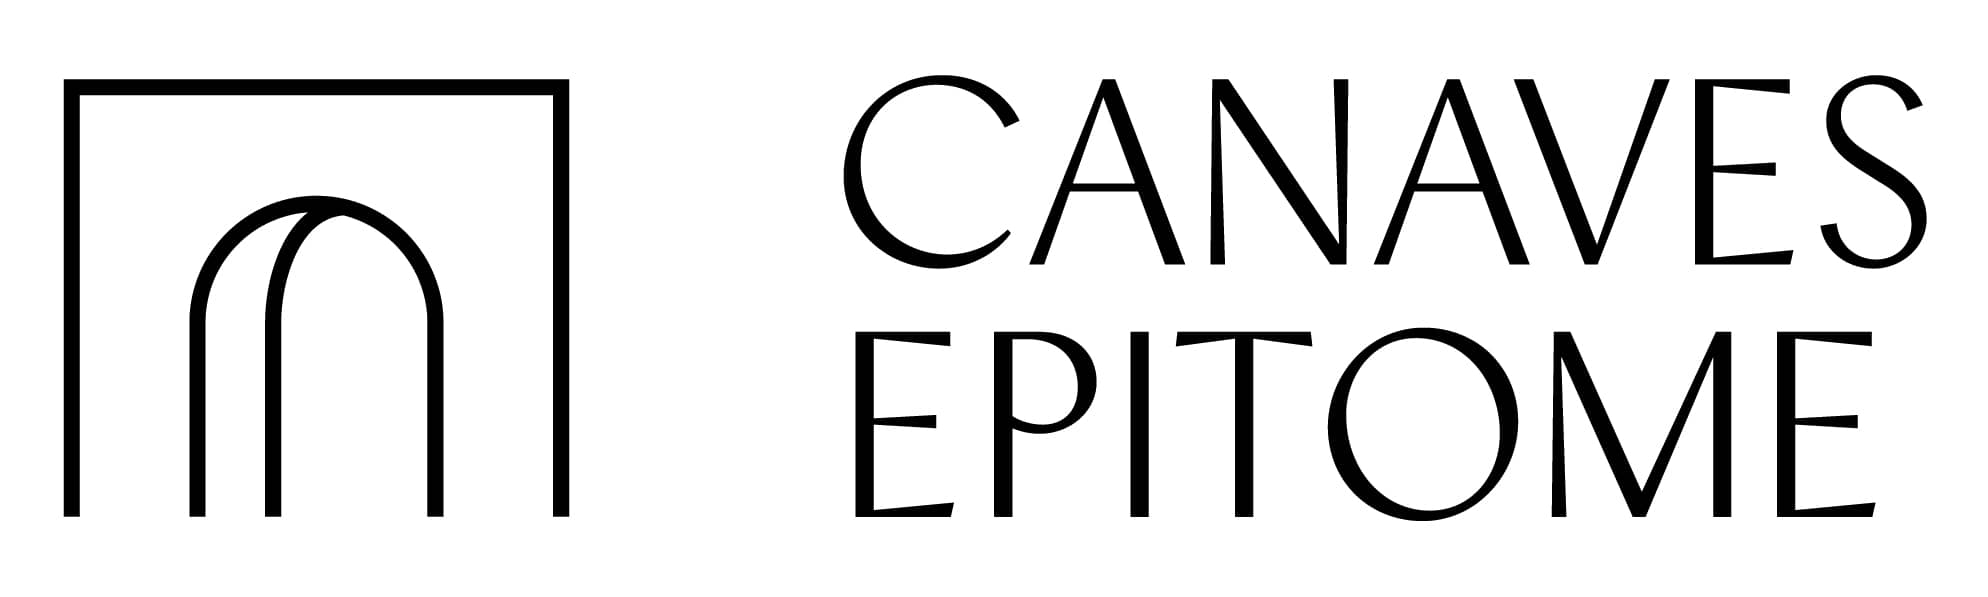 logo-canaves-epitome